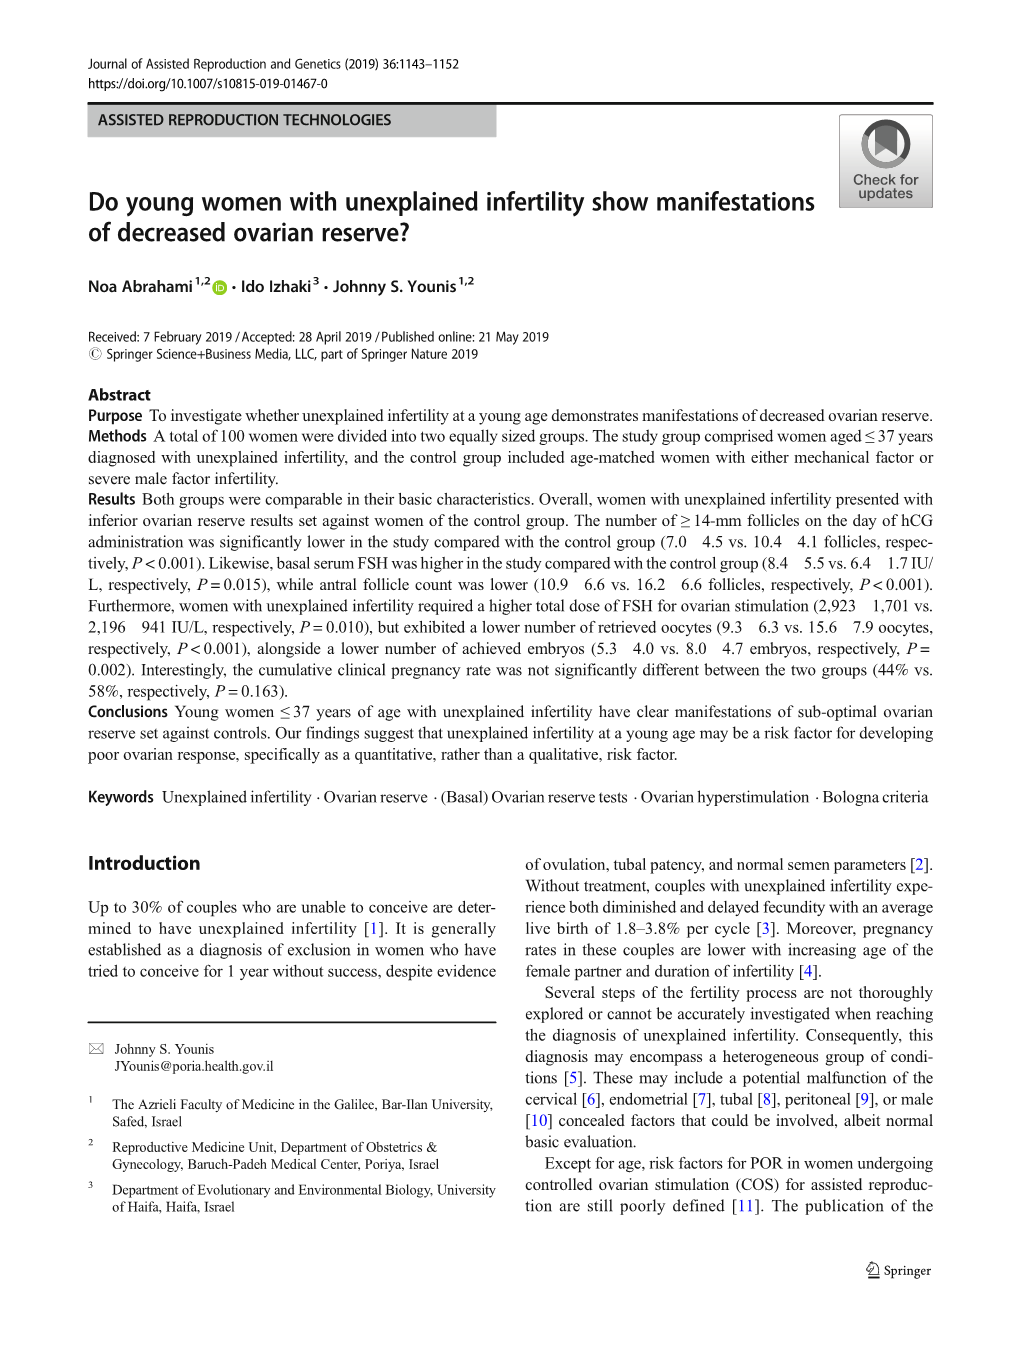 Do Young Women with Unexplained Infertility Show Manifestations of Decreased Ovarian Reserve?